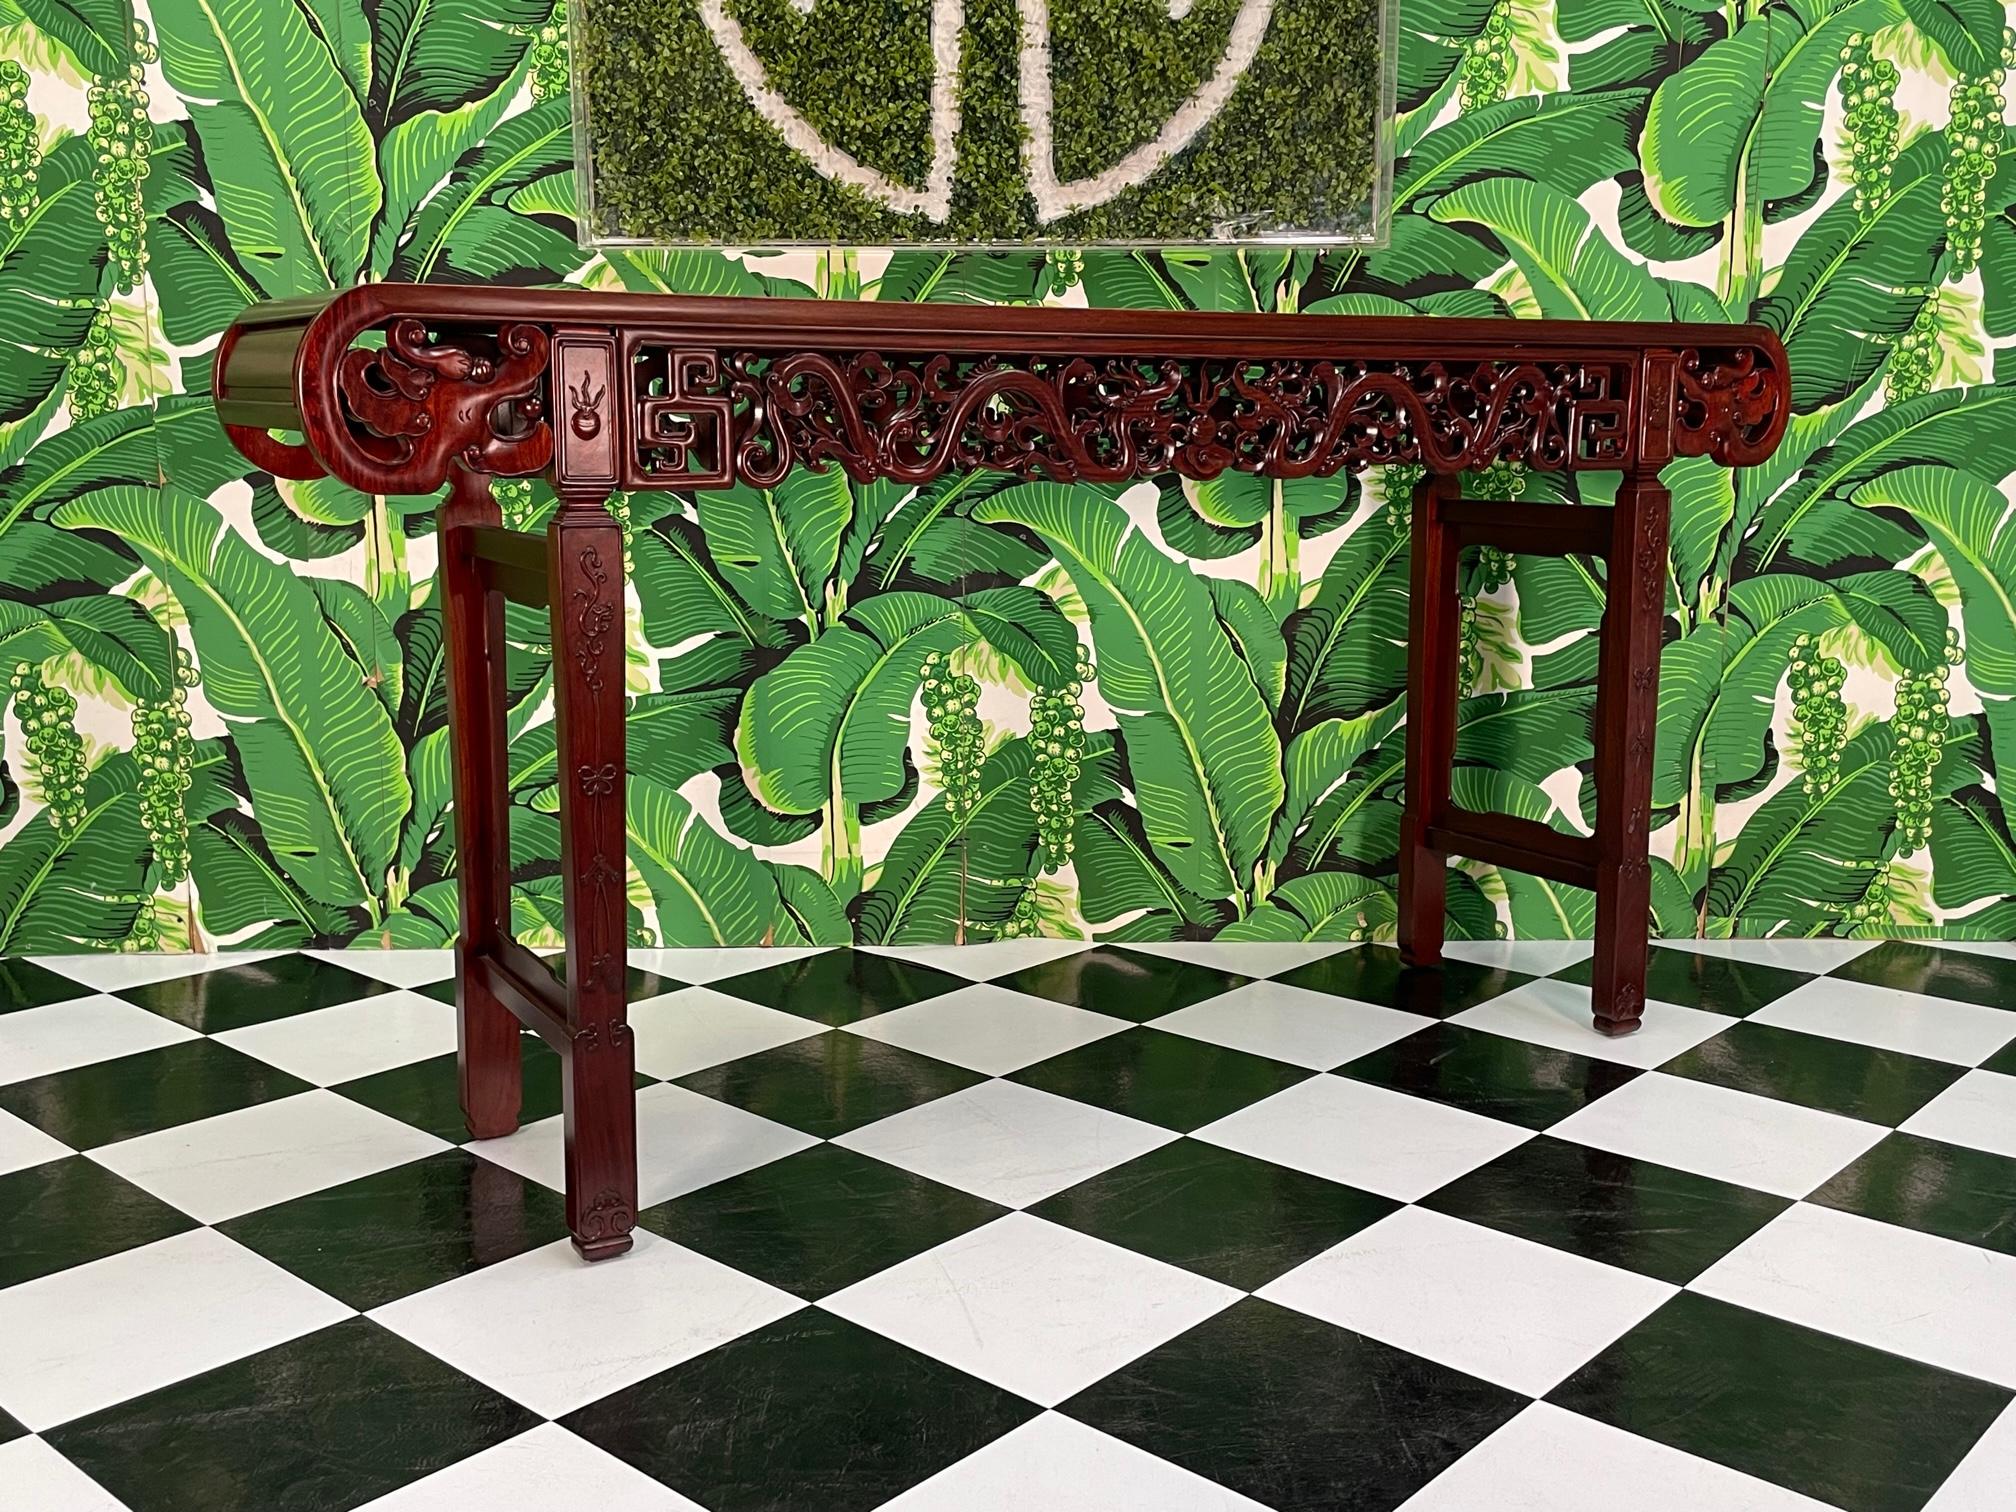 Asian console table features hand carved images of dragons along the frieze and decorative carved legs. Stands 38